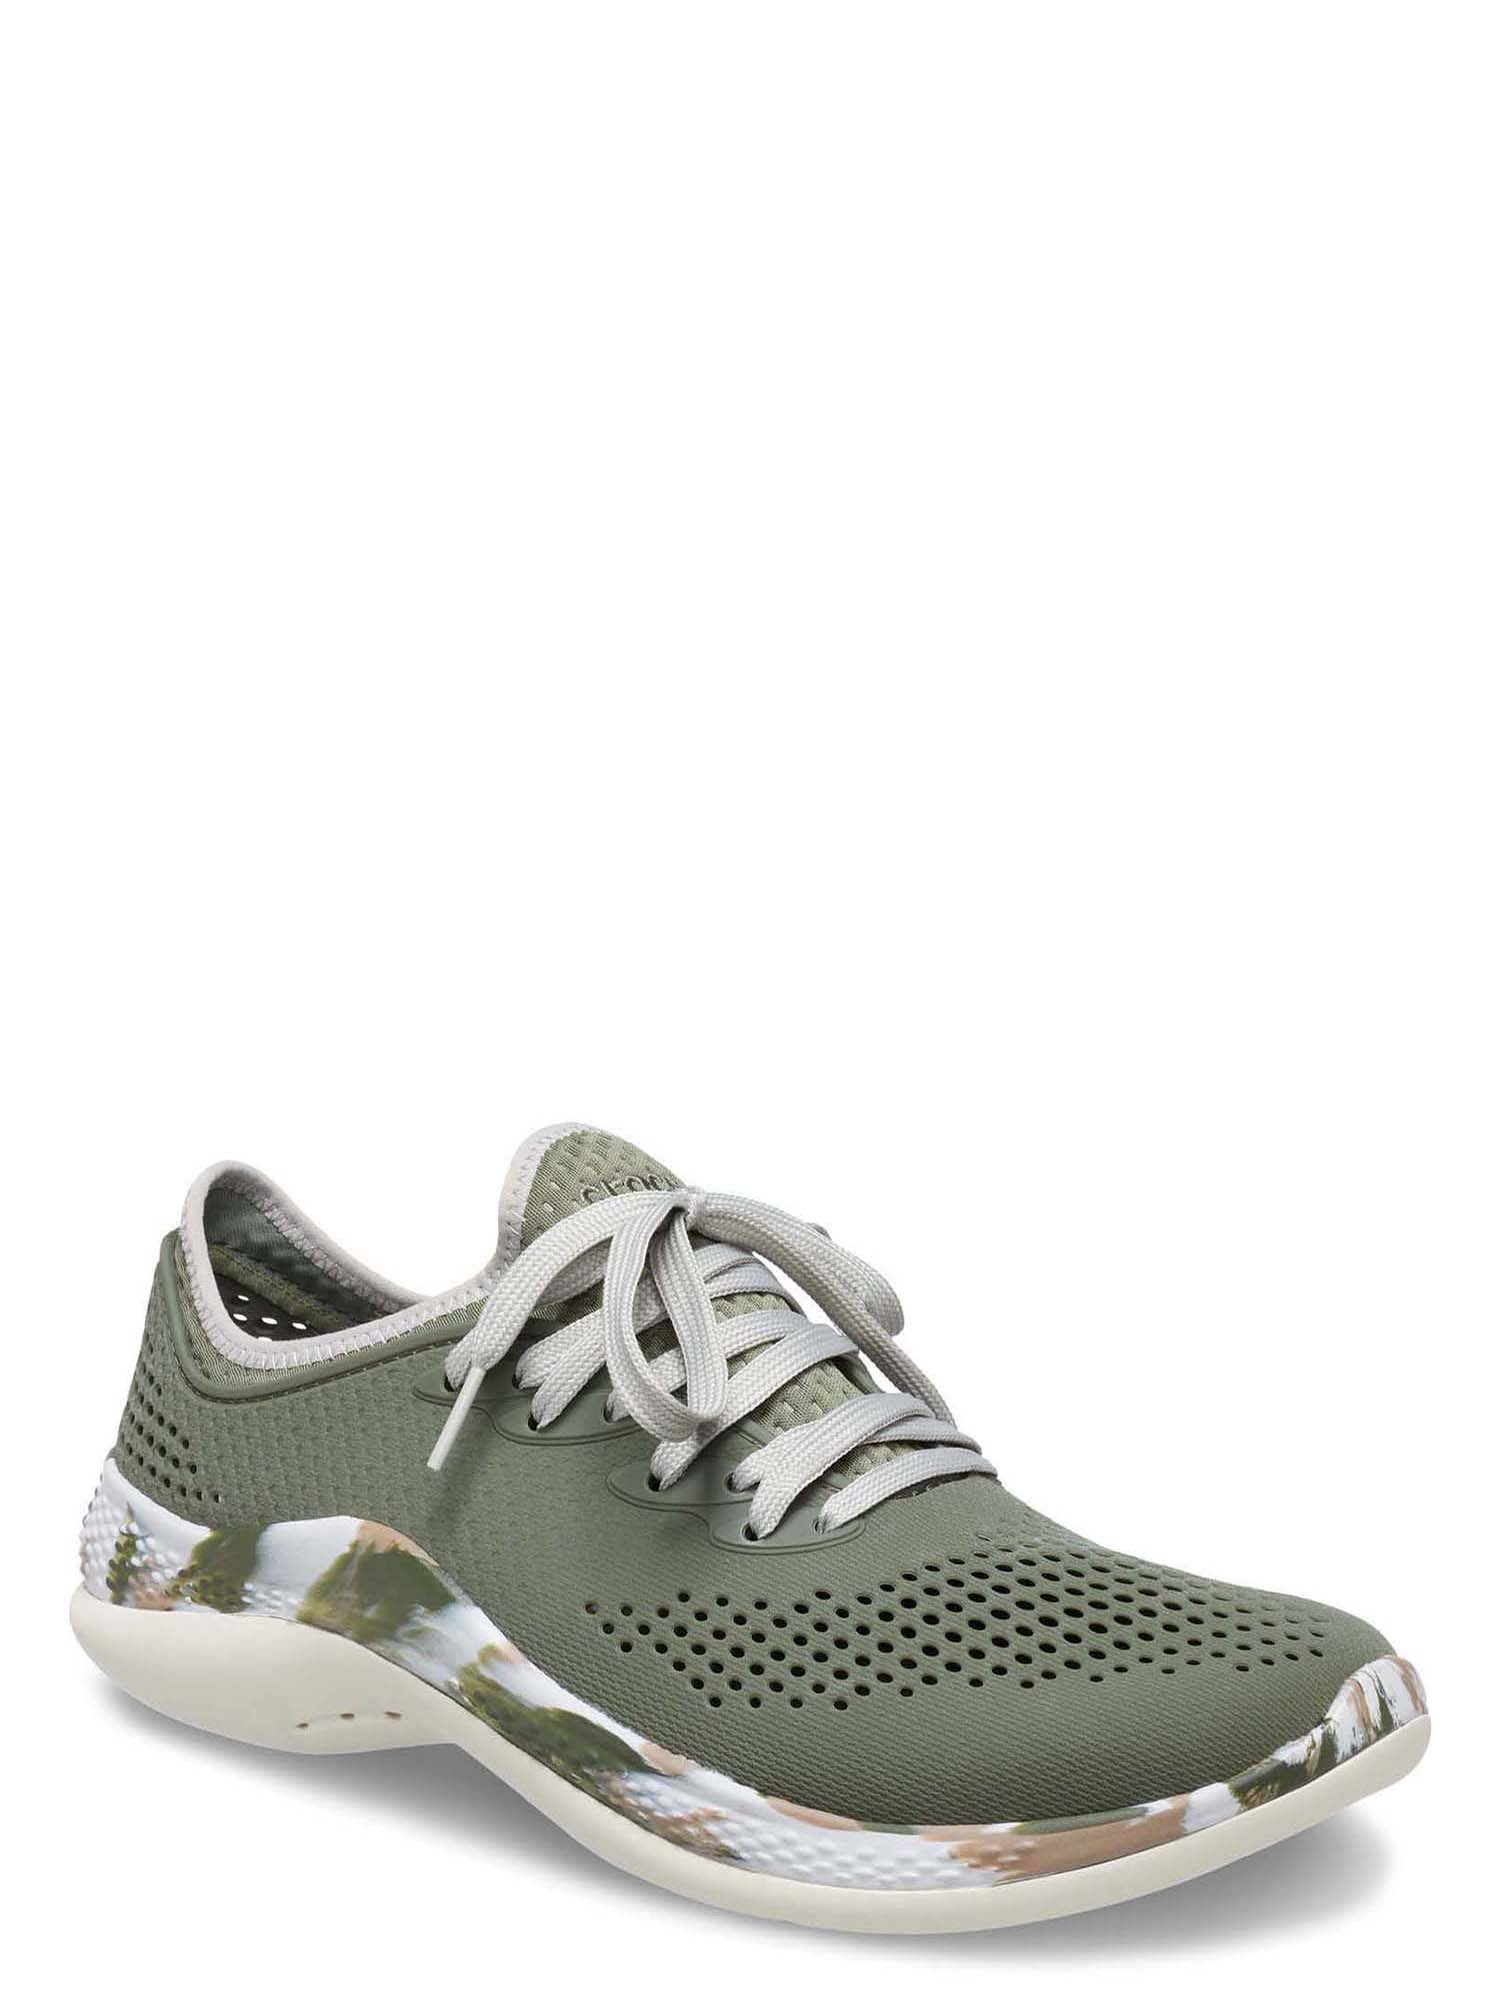 Crocs Men's LiteRide 360 Pacer Lace-Up Shoes (Army Green) $25 + Free Shipping w/ Walmart+ or on $35+